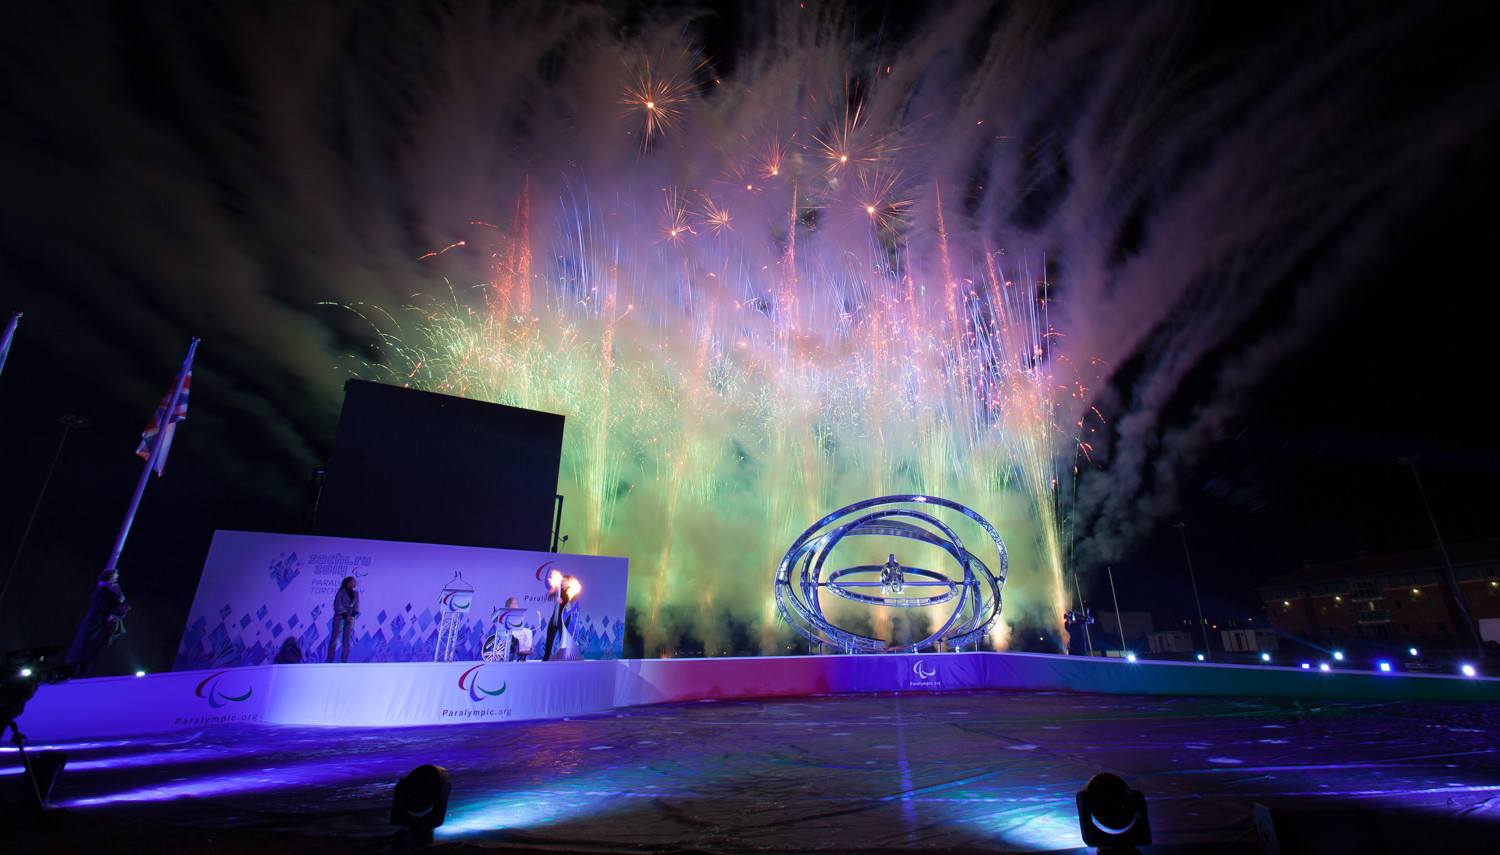 Stoke Mandeville Stadium has become the tradtional home for the lighting of the Paralympic Torch ©AVDC